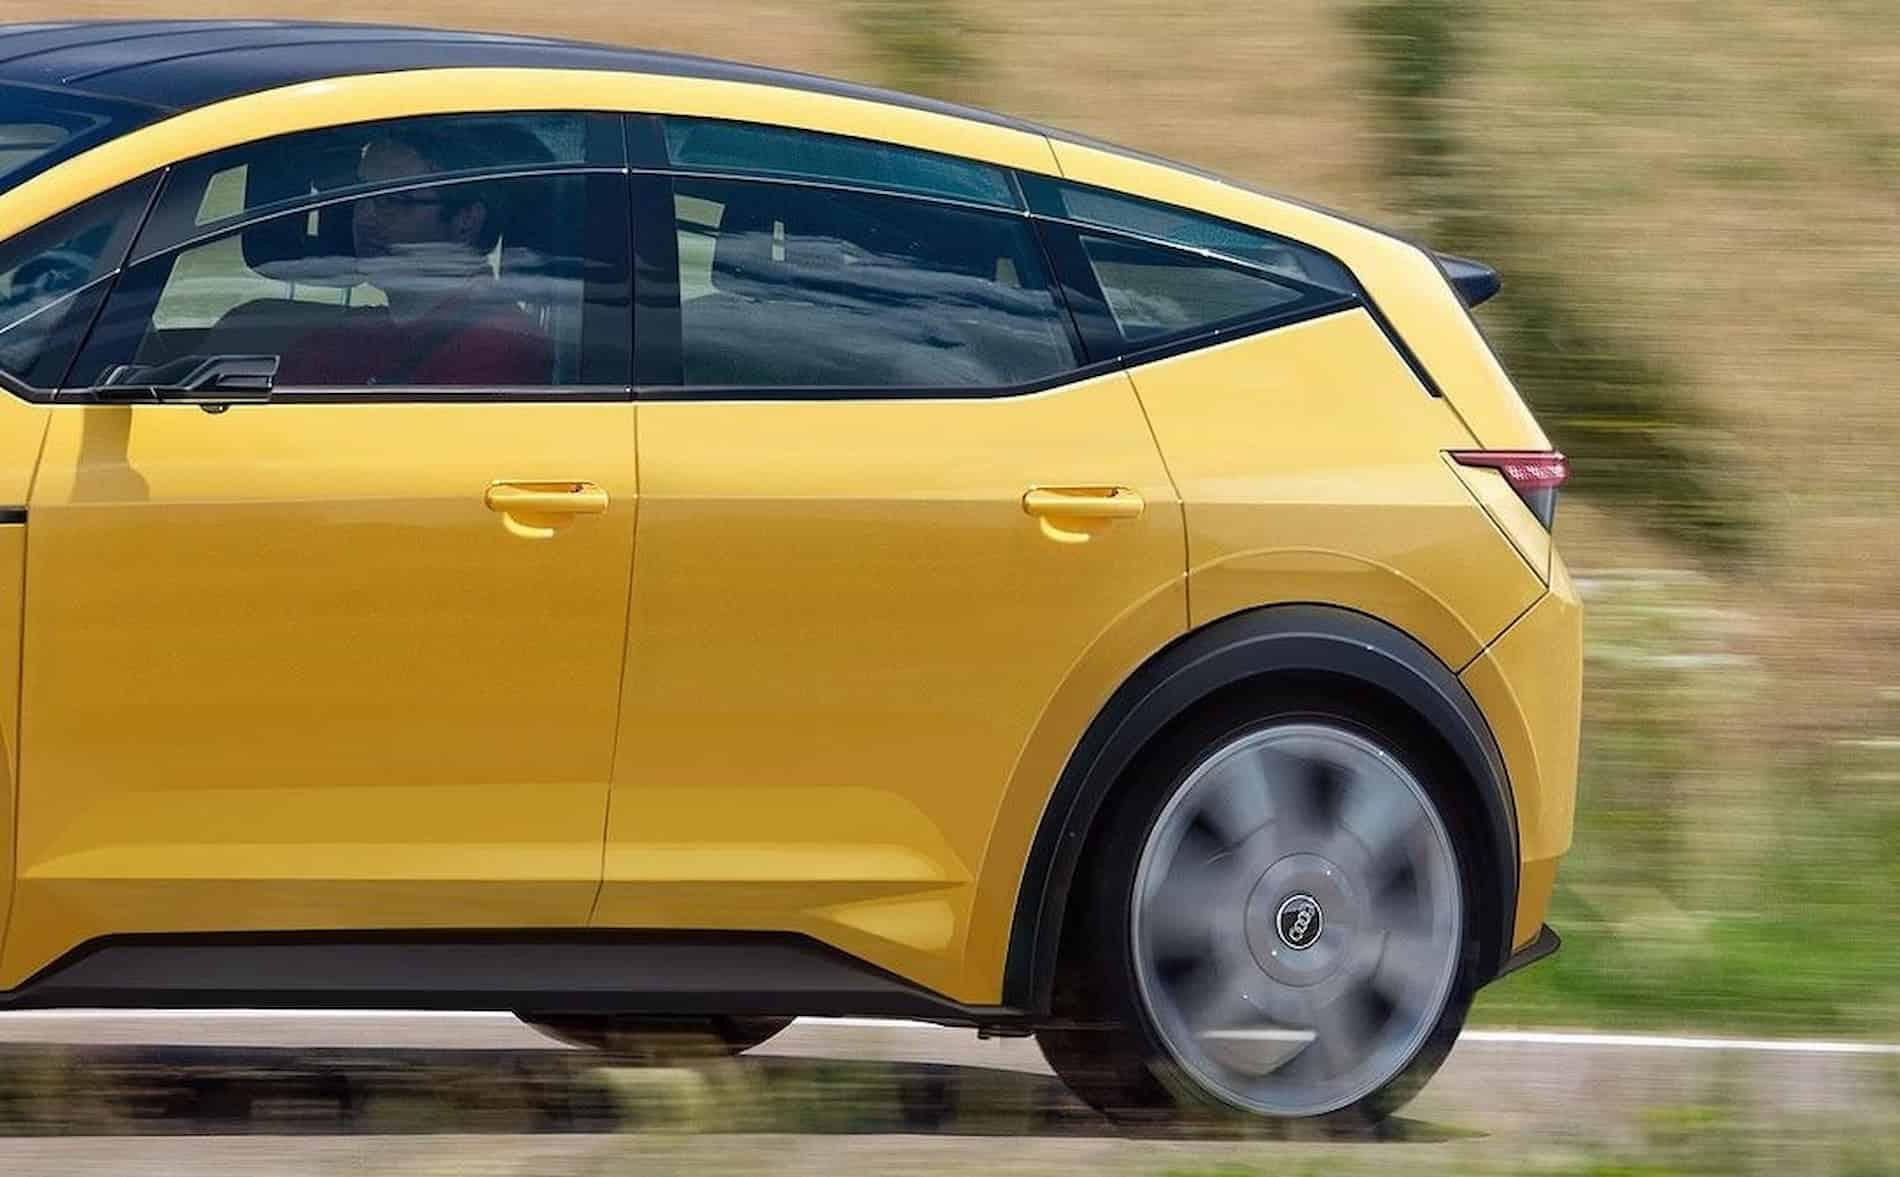 new audi a2 sends digital e tron vibes could it succeed where the old minivan failed 4